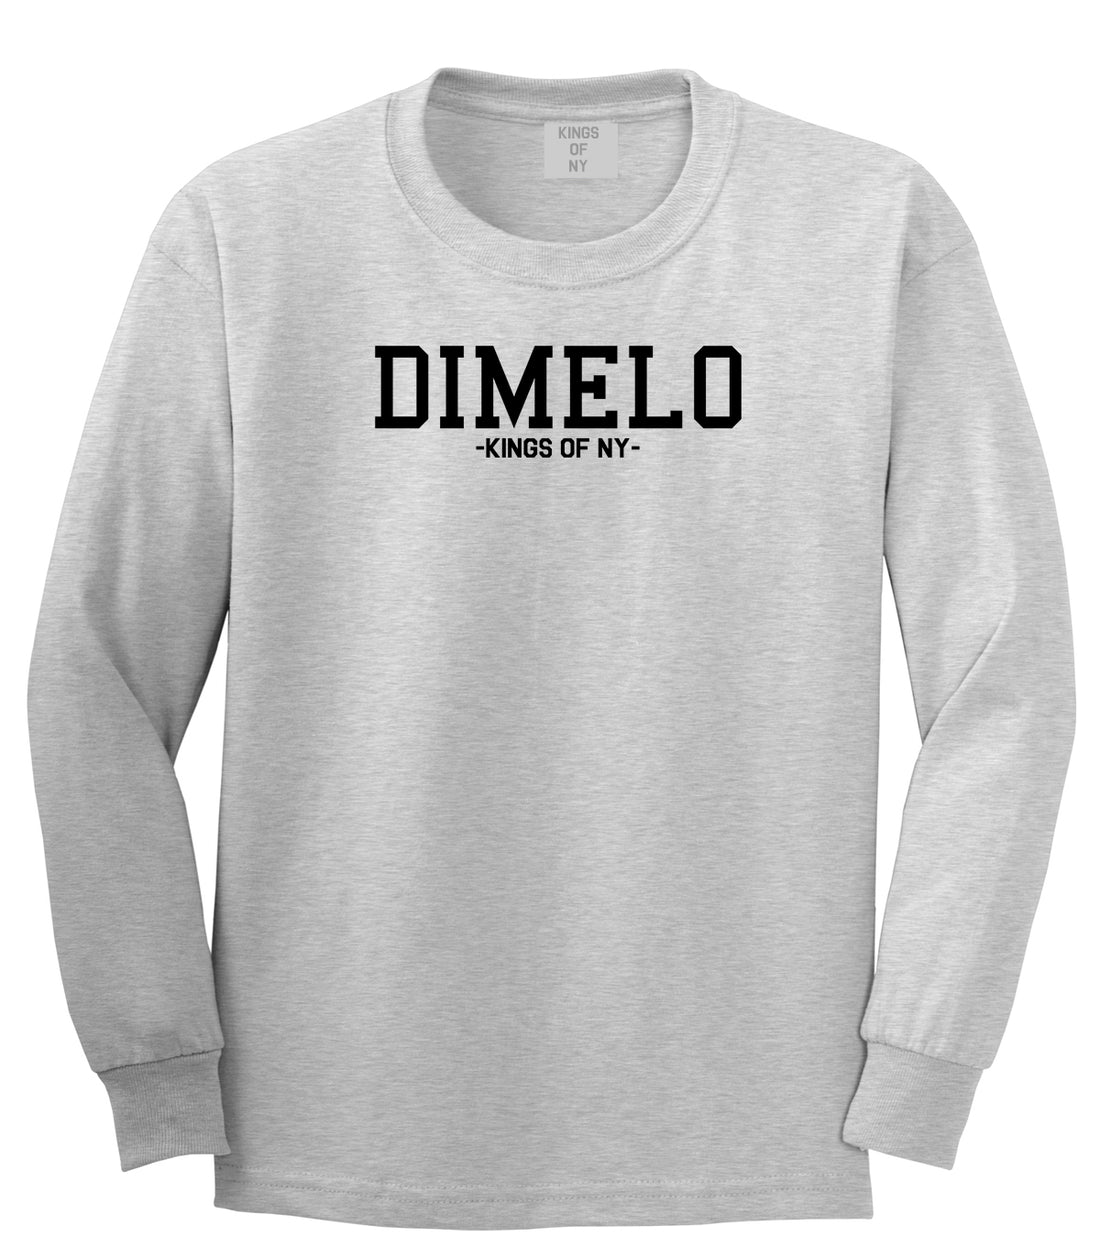 Dimelo Kings Of NY Long Sleeve T-Shirt in Grey